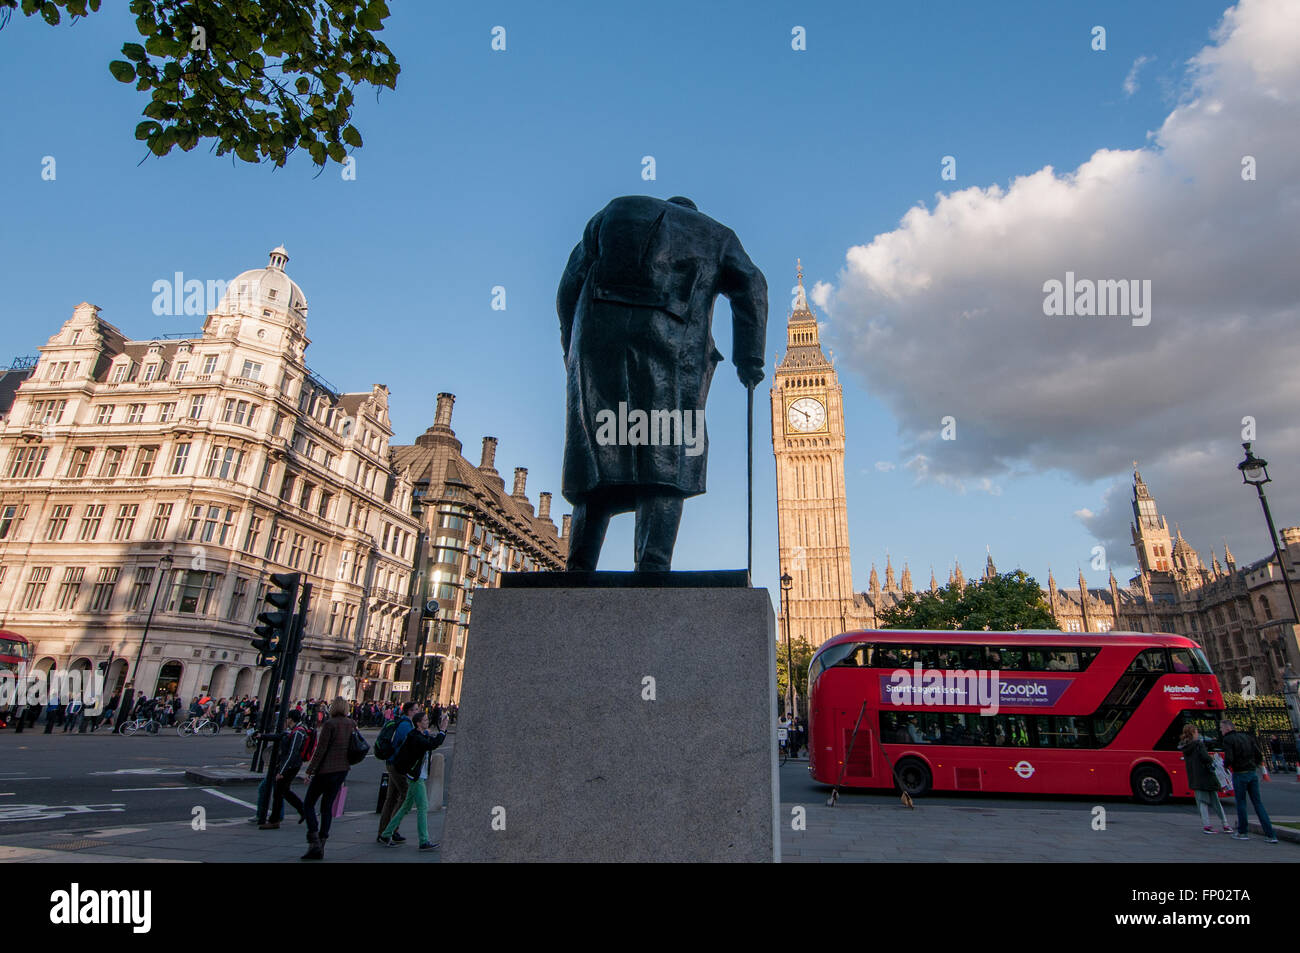 Statue of Winston Churchill in PARLIAMENT SQUARE facing Big Ben and the Houses of Parliament London UK Stock Photo